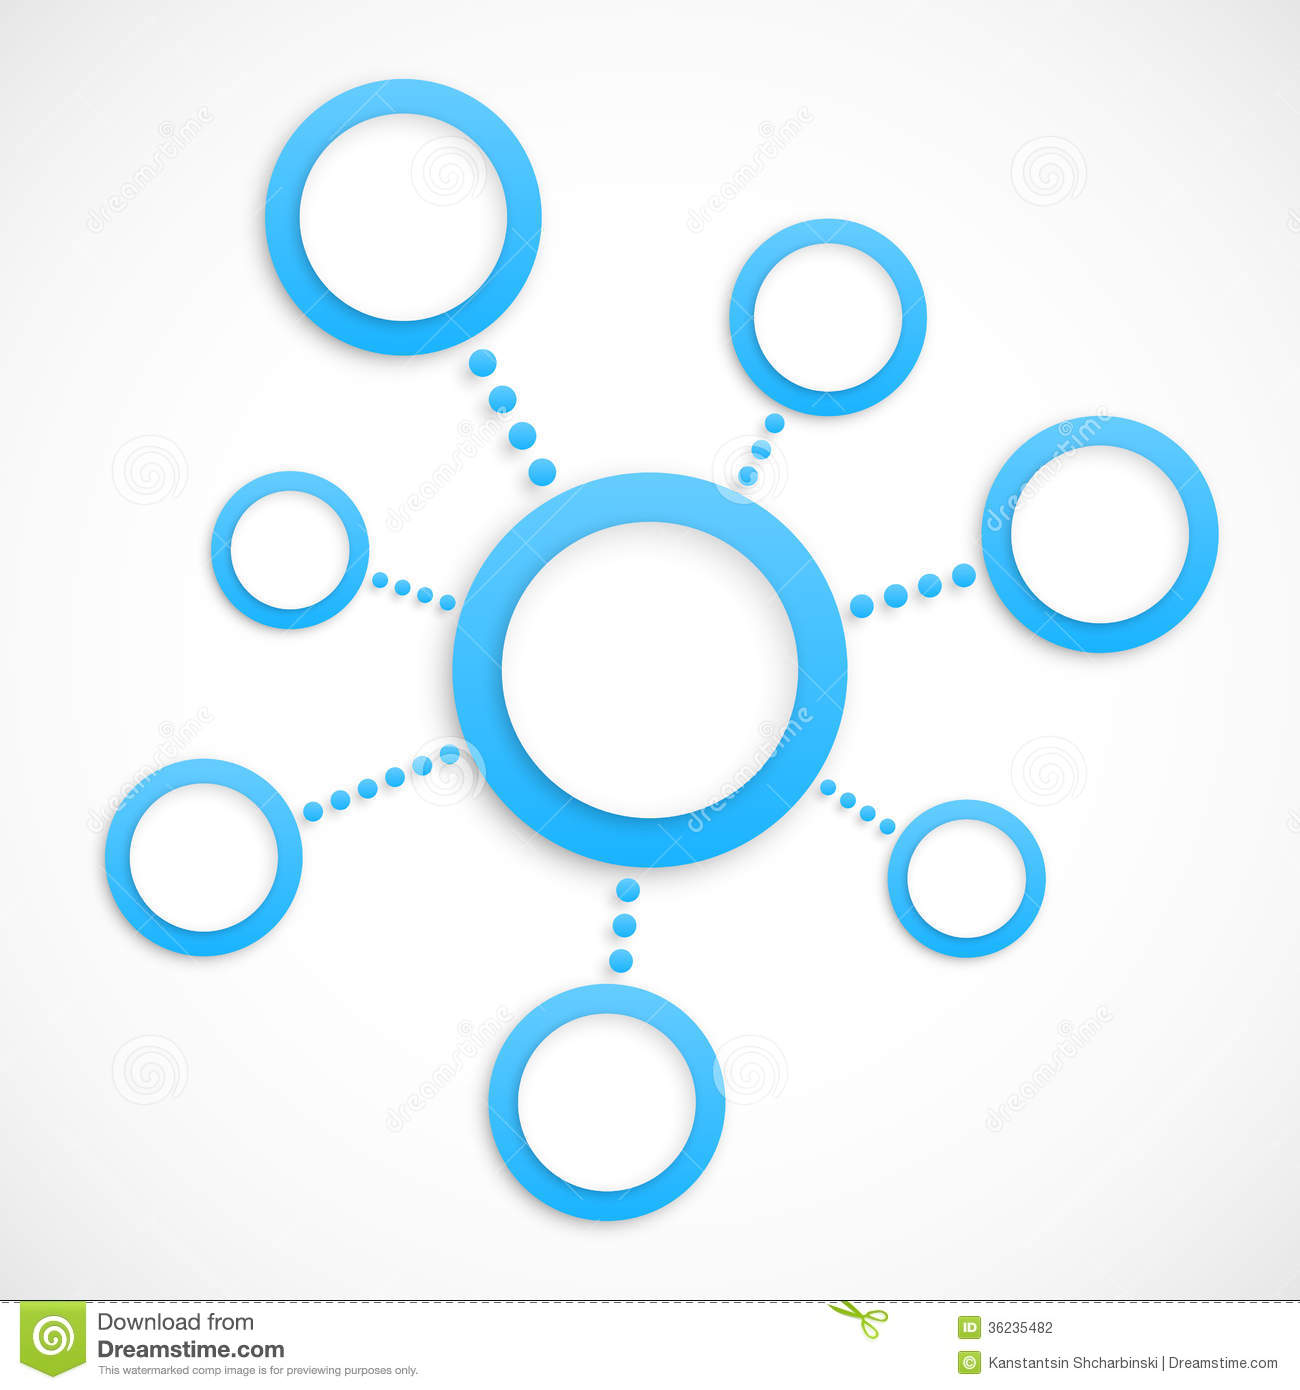 Network Abstract Vector